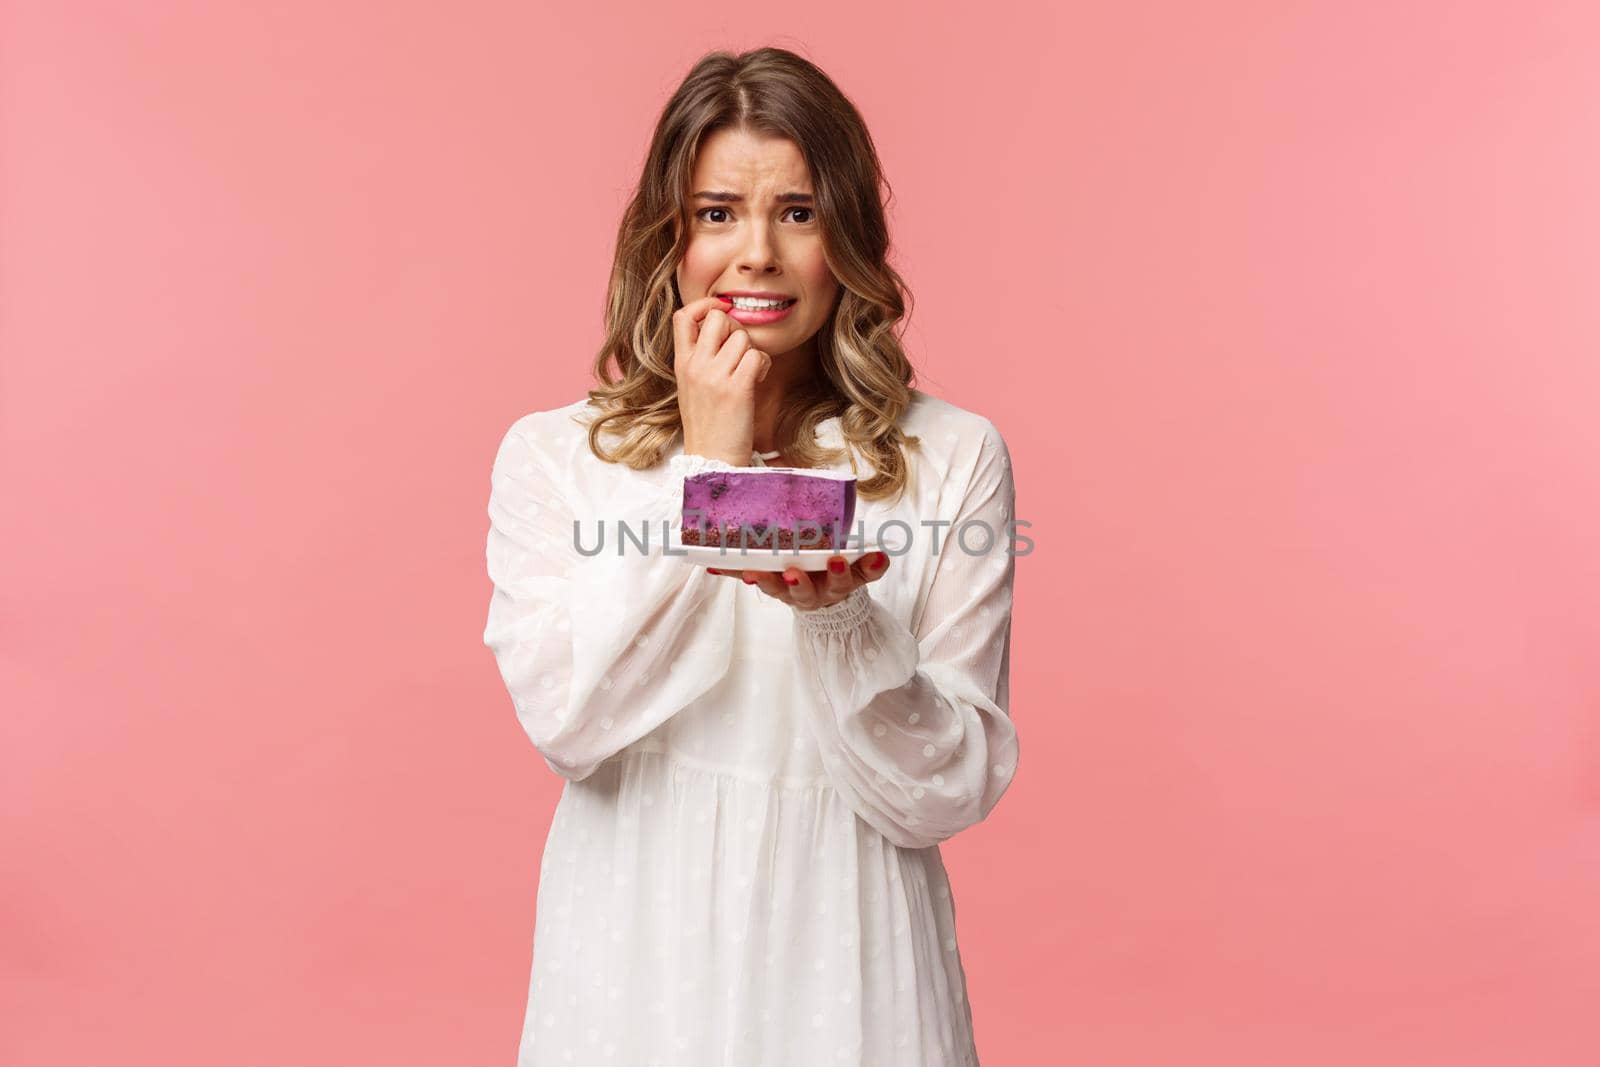 Holidays, spring and party concept. Alarmed, worried young blond girl hesitating eat cake or not, being on diet, trying stay healthy, holding dessert, biting finger nervously, pink background.